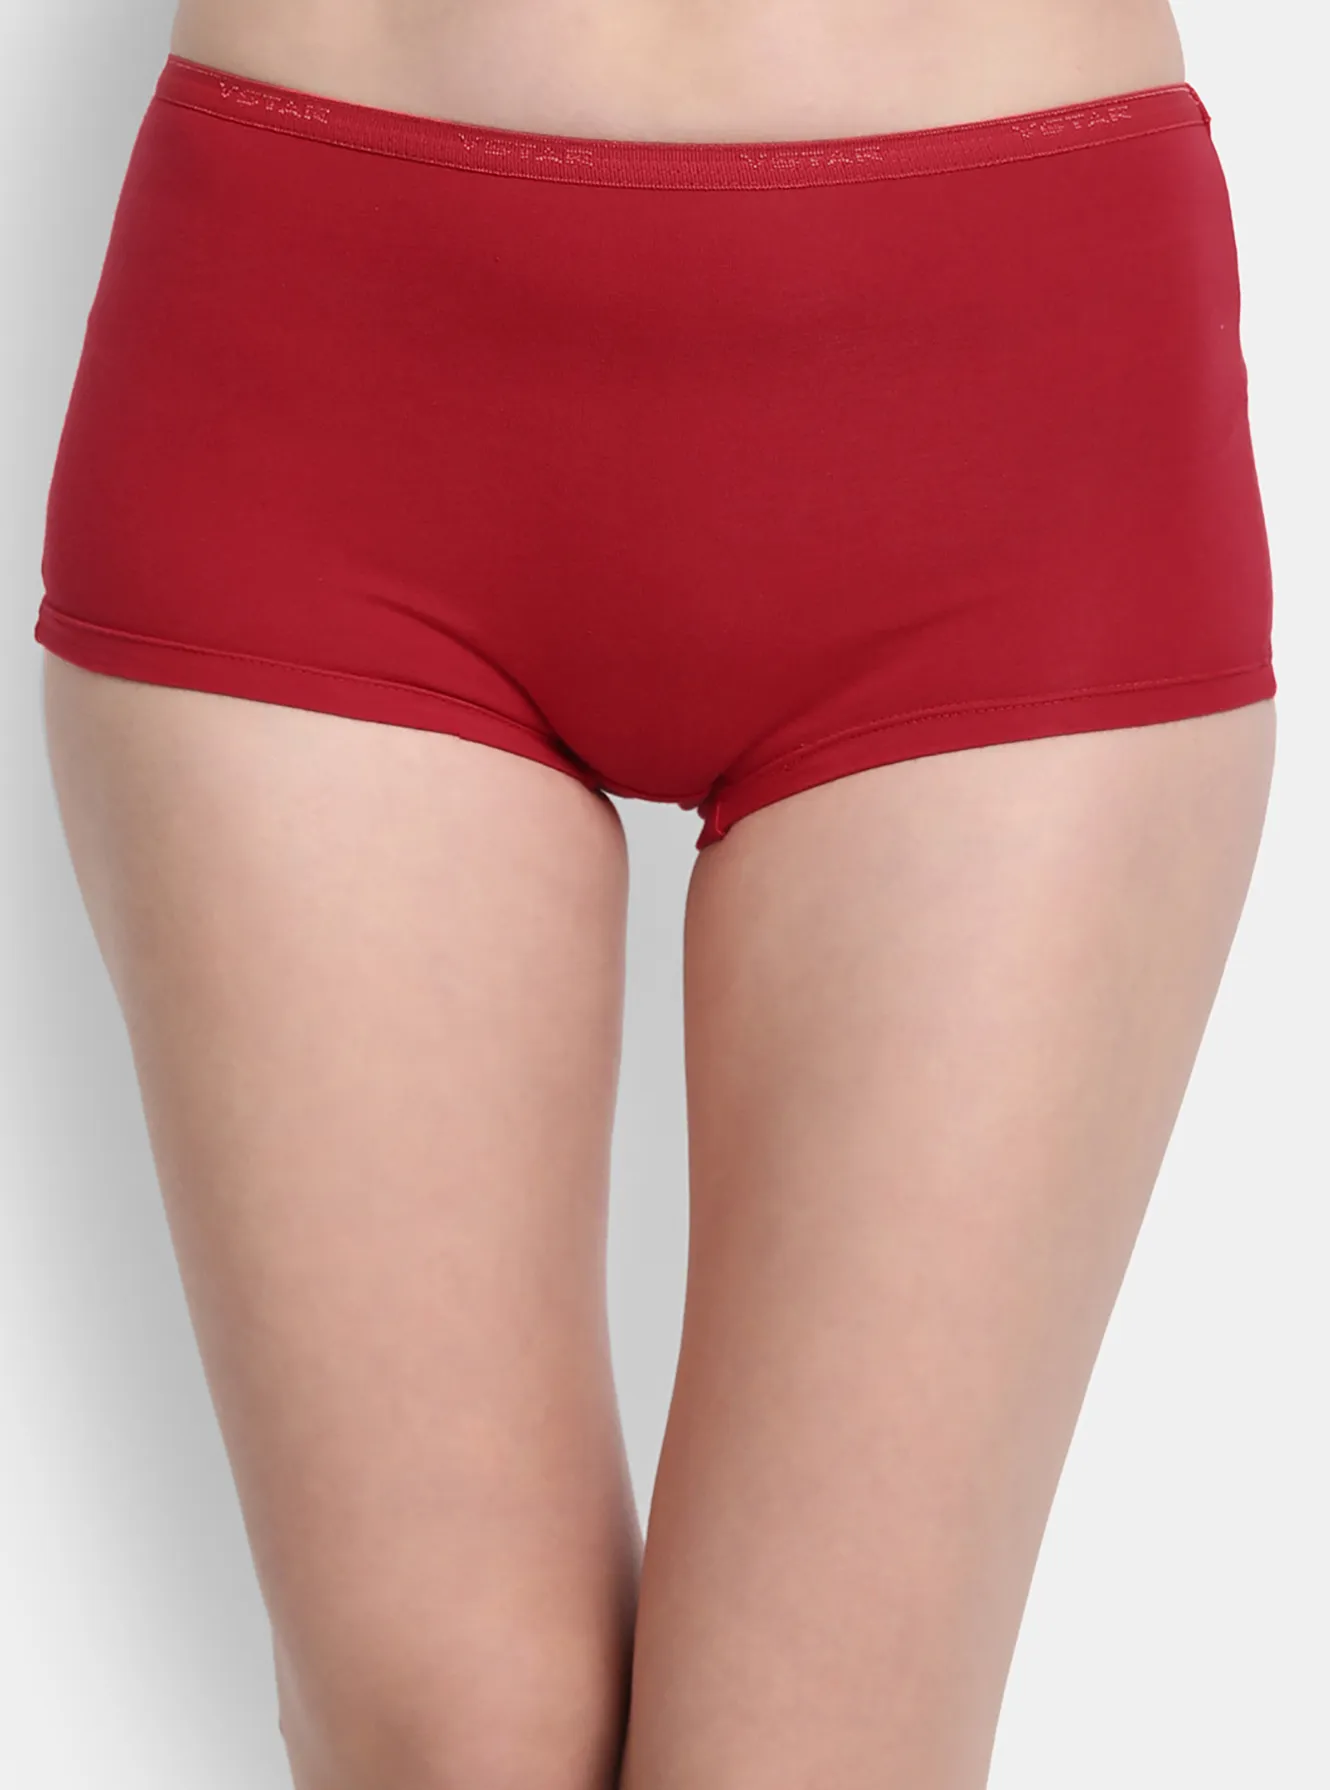 High waist panty with ultra soft exposed elastic waistband - Pack